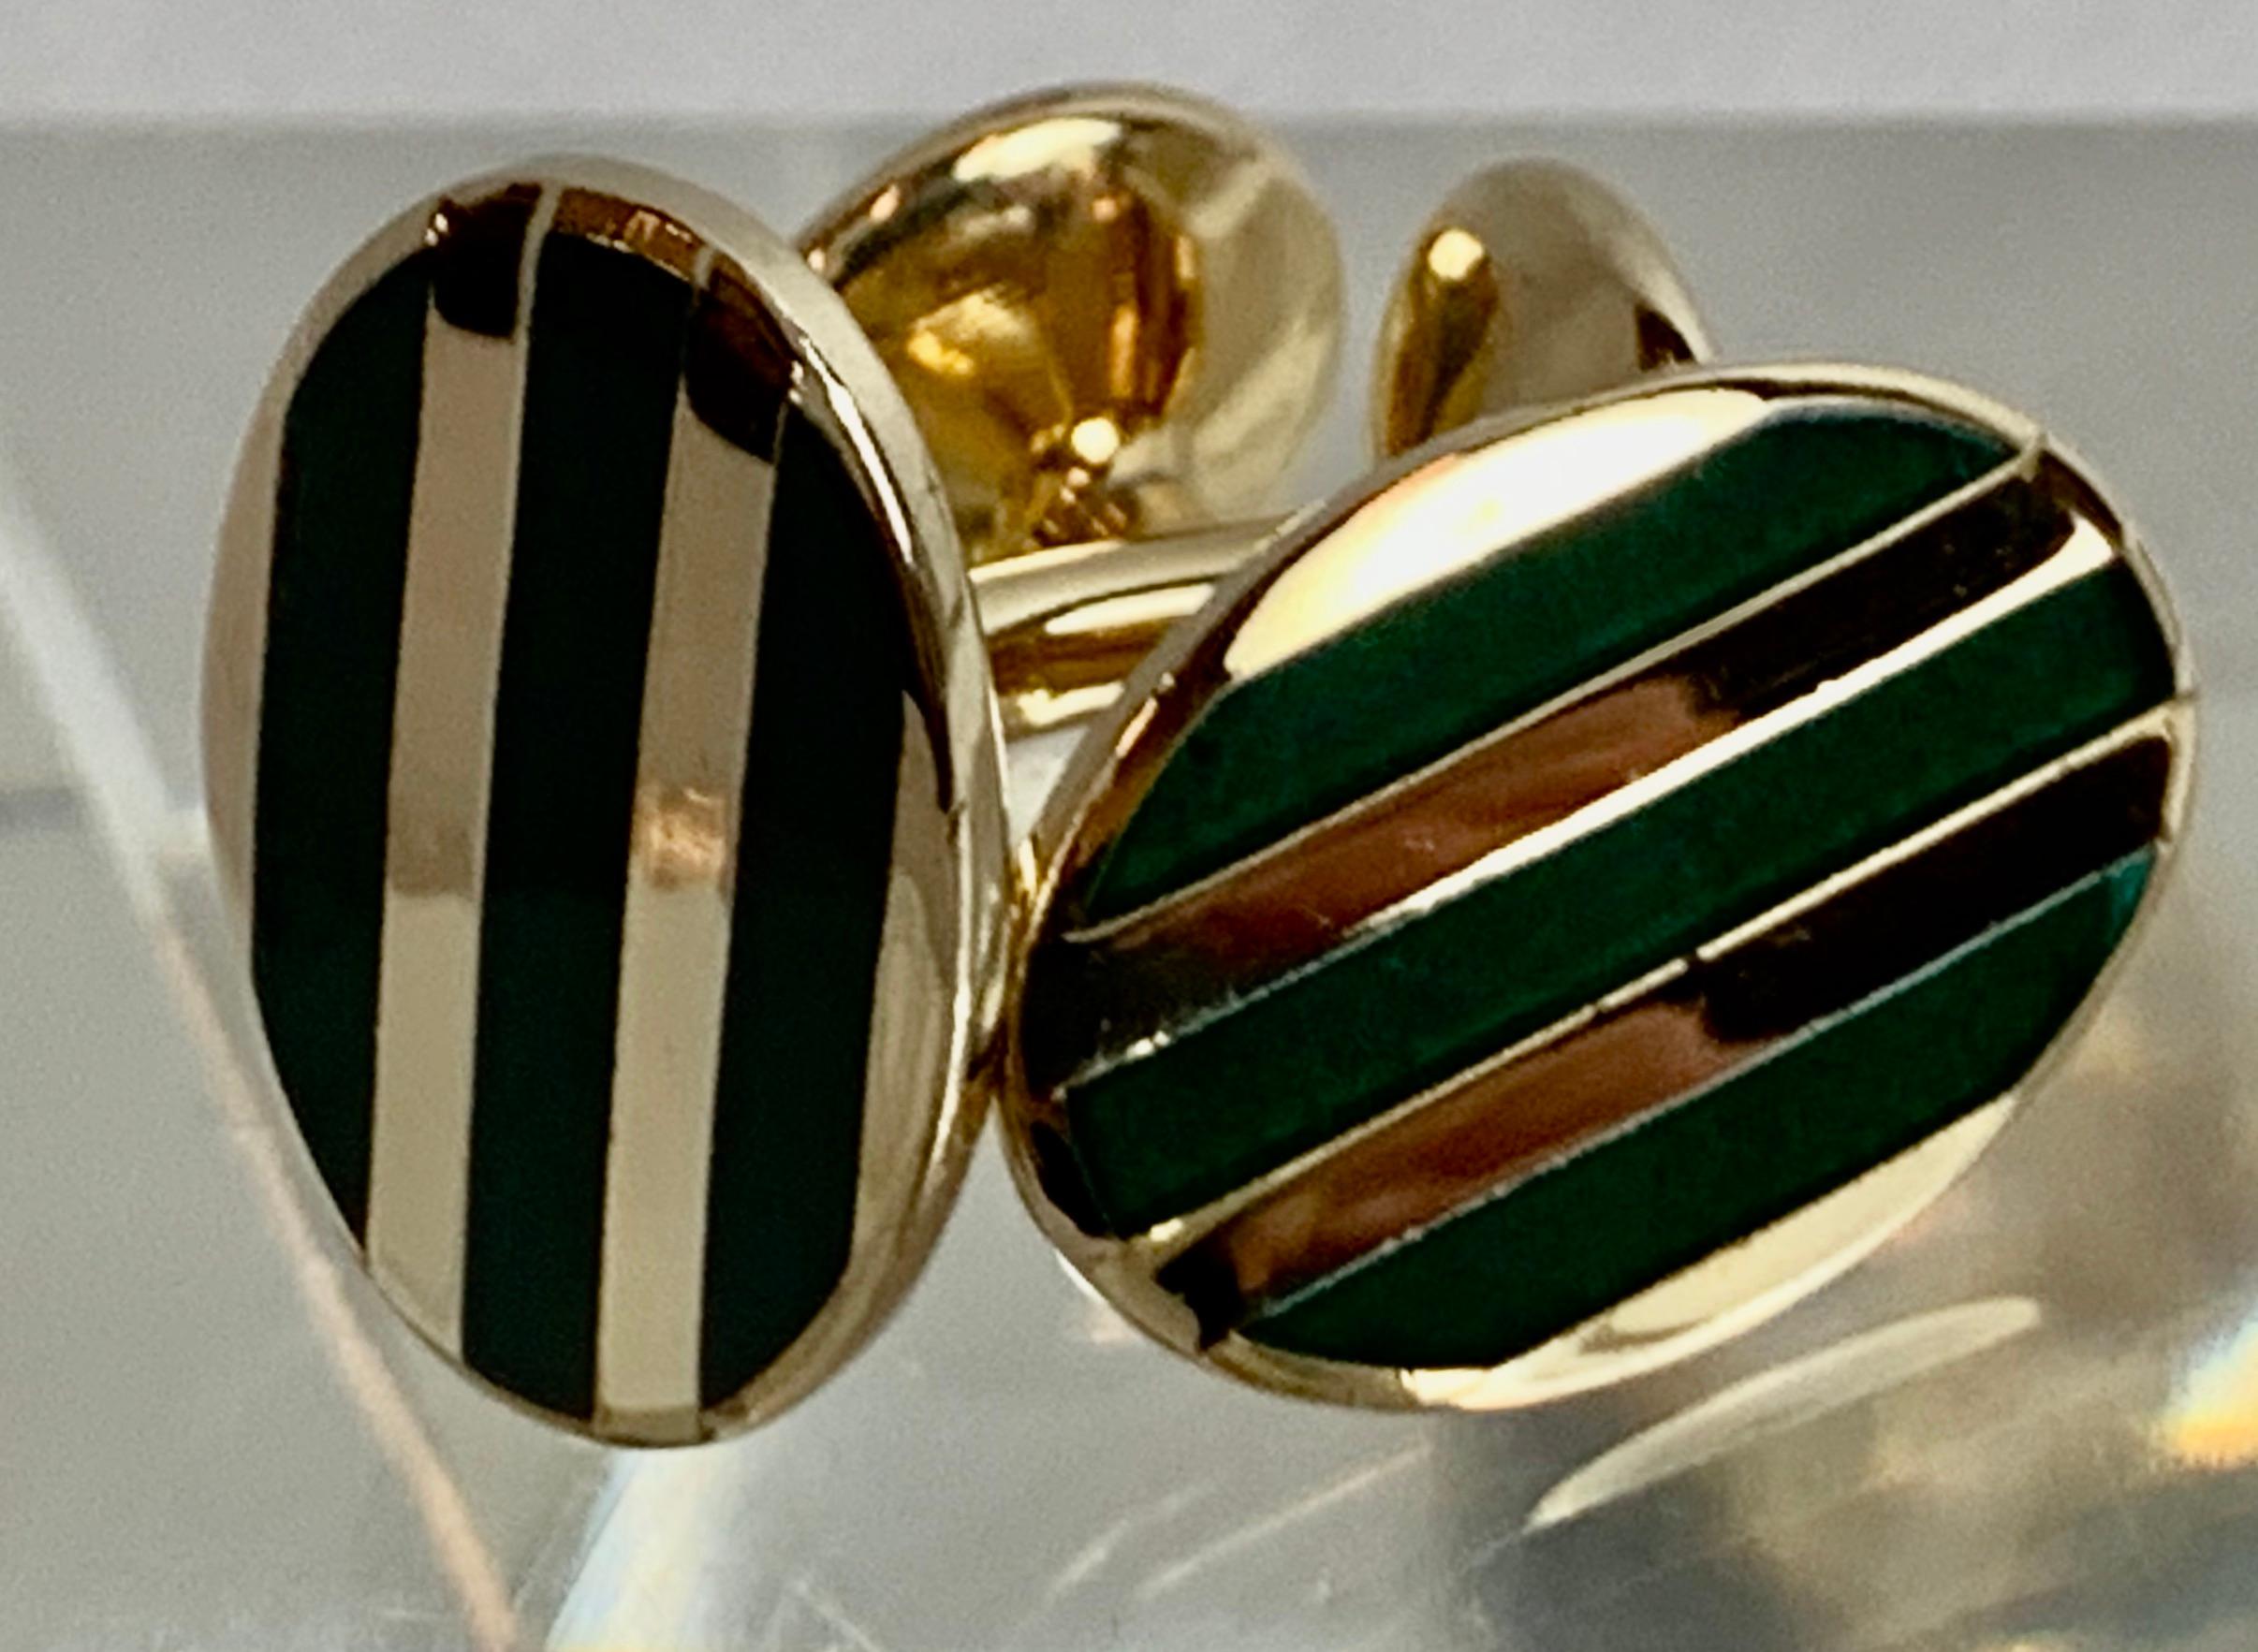 Women's or Men's Oval Cufflinks with High Fired Green Enamel Stripes-Gold Filled 